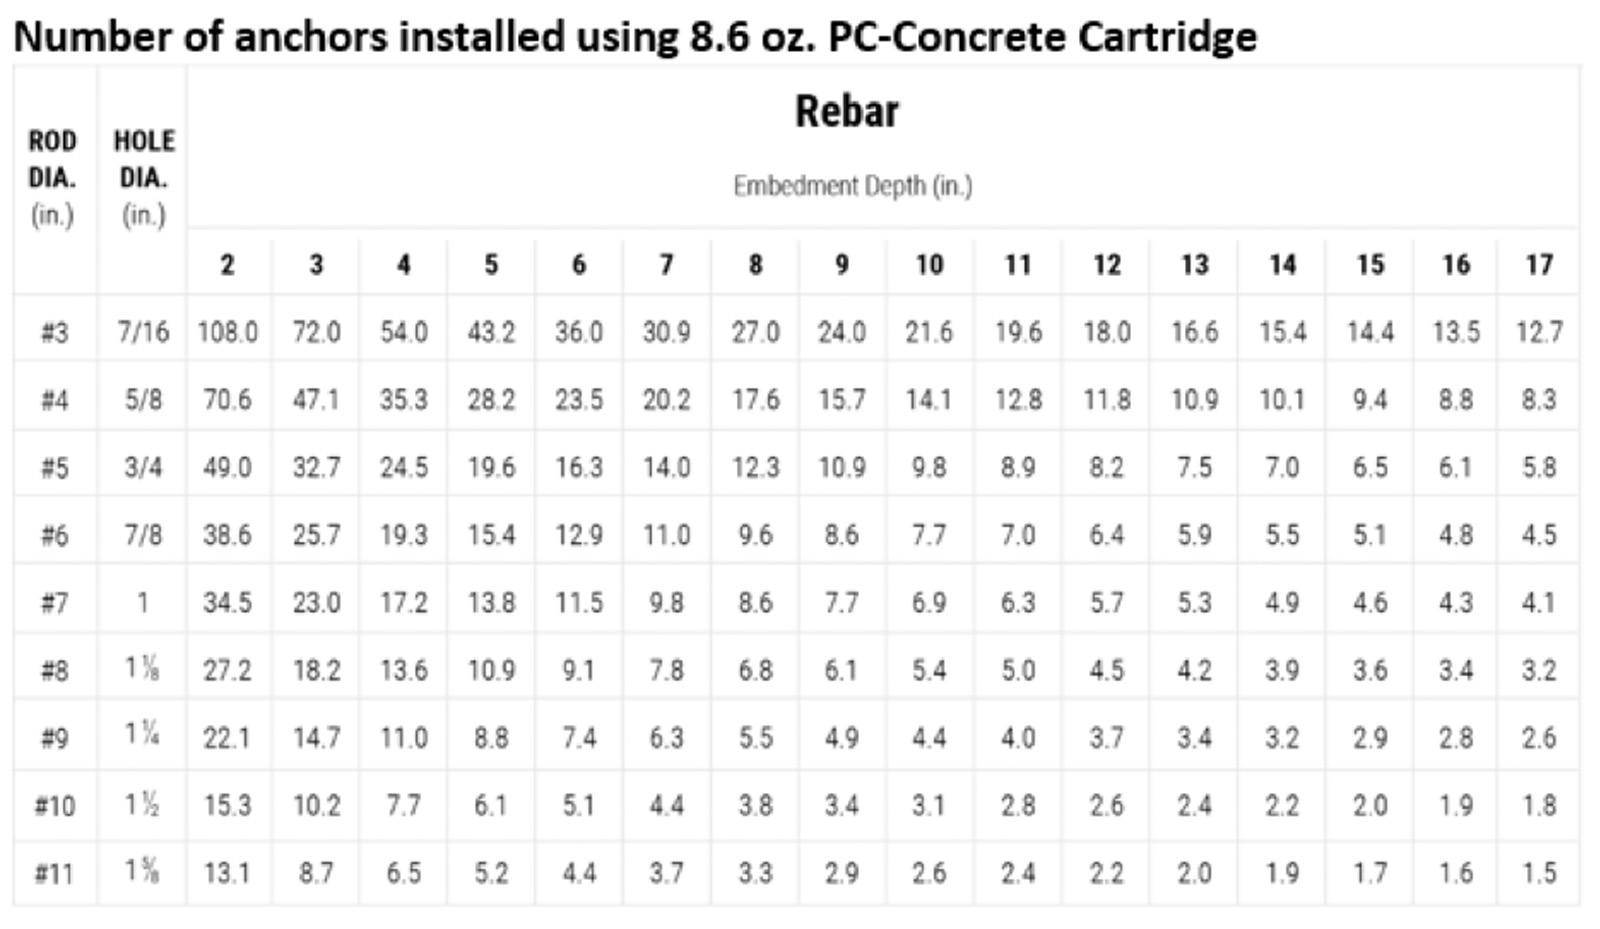 PC Concrete - Number of Anchors Installed Using 8.6 PC-Concrete Cartridge